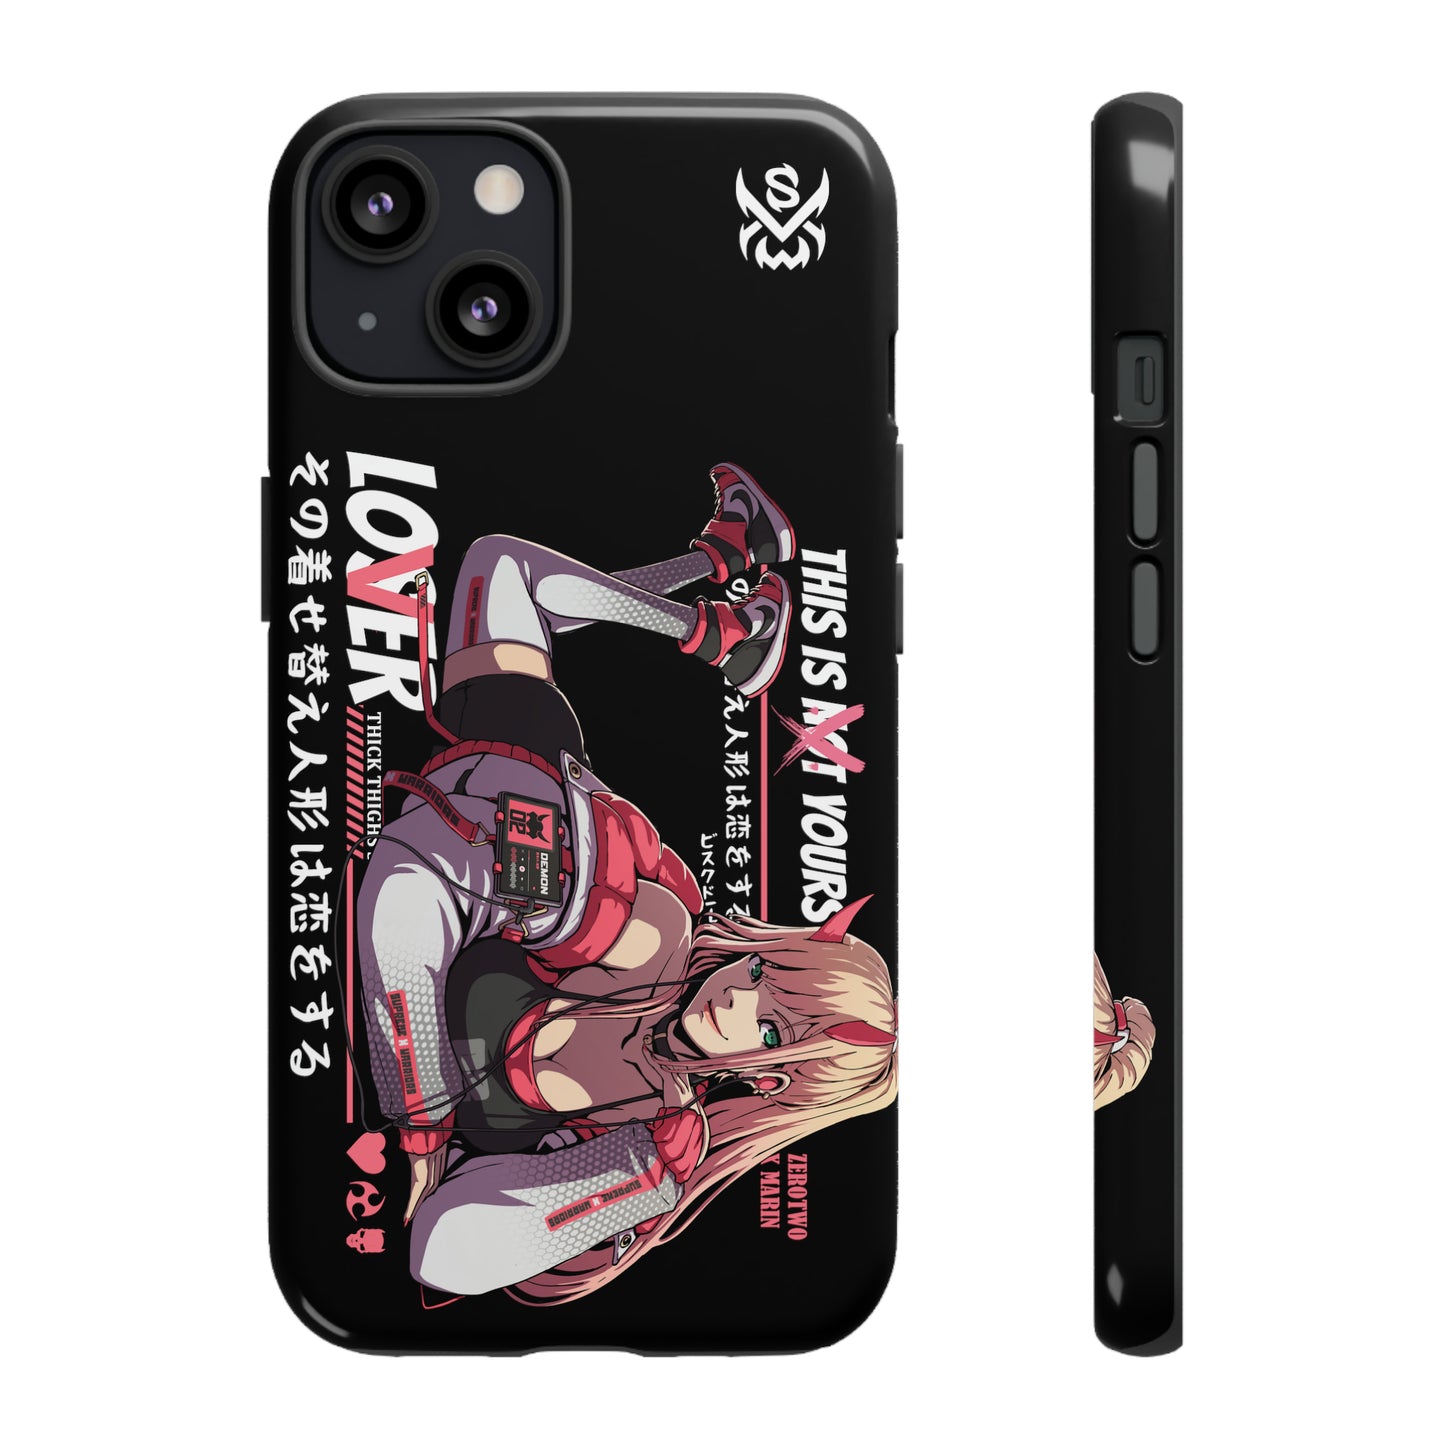 Lover / iPhone Cases - LIMITED